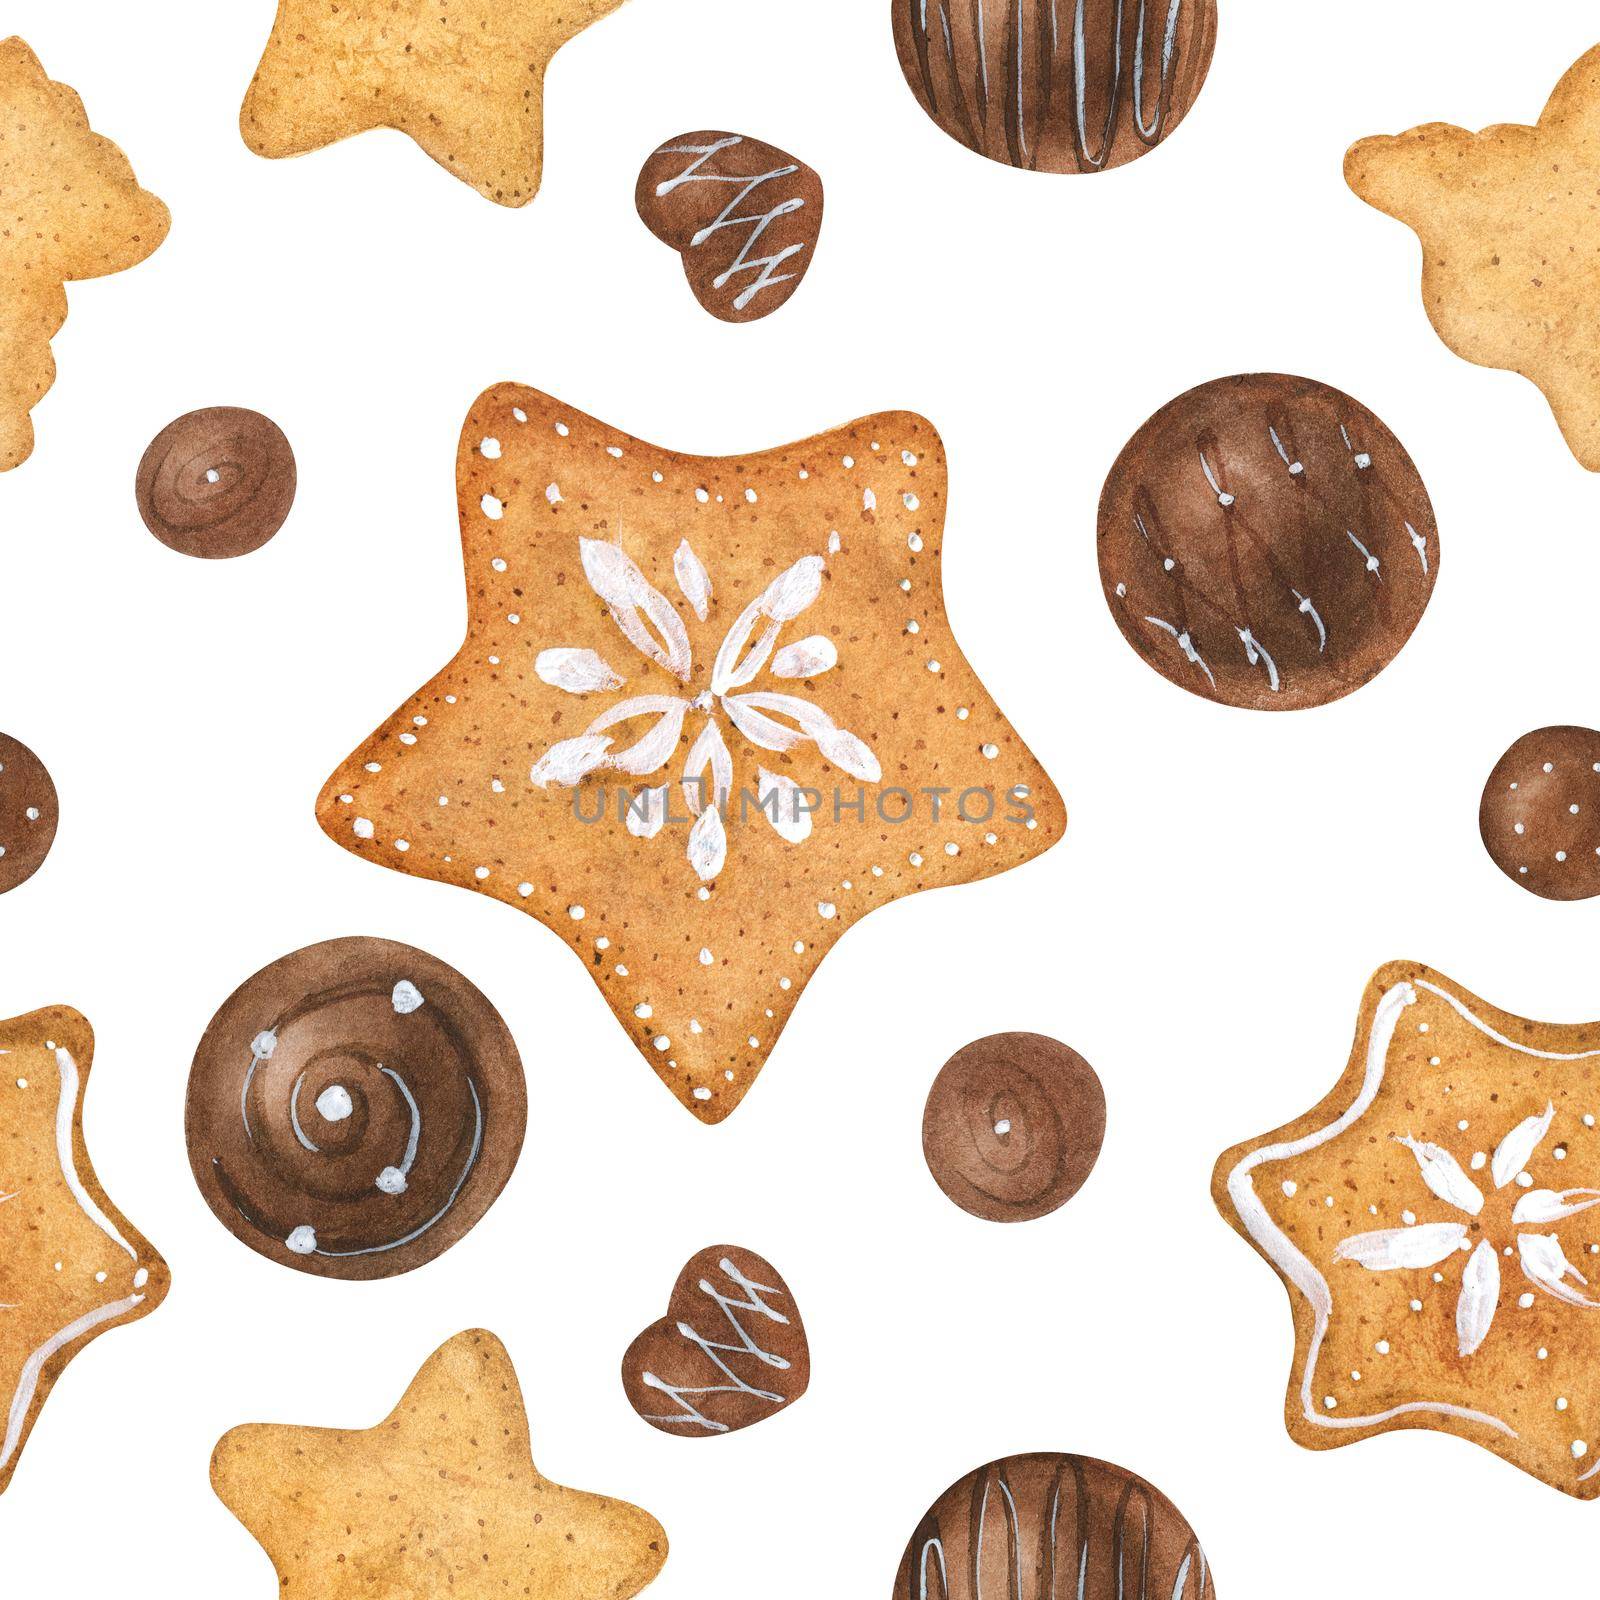 Sweet winter seamless pattern with chocolate candies and cookies. Watercolor illustration for any event decoration, white background, path included